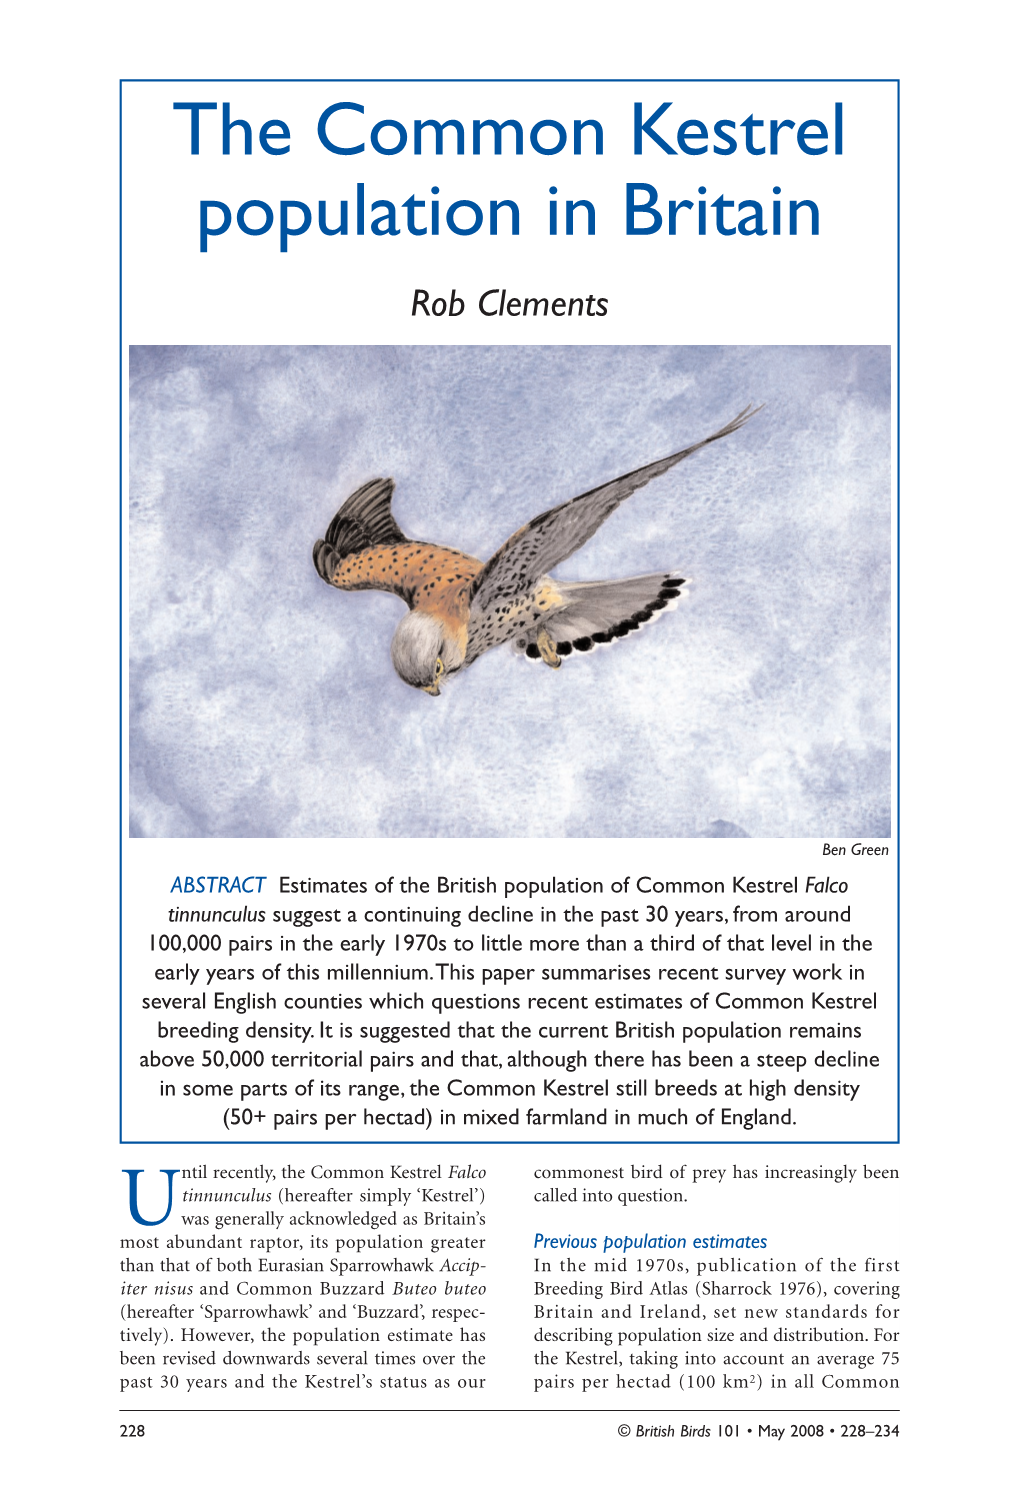 The Common Kestrel Population in Britain Rob Clements